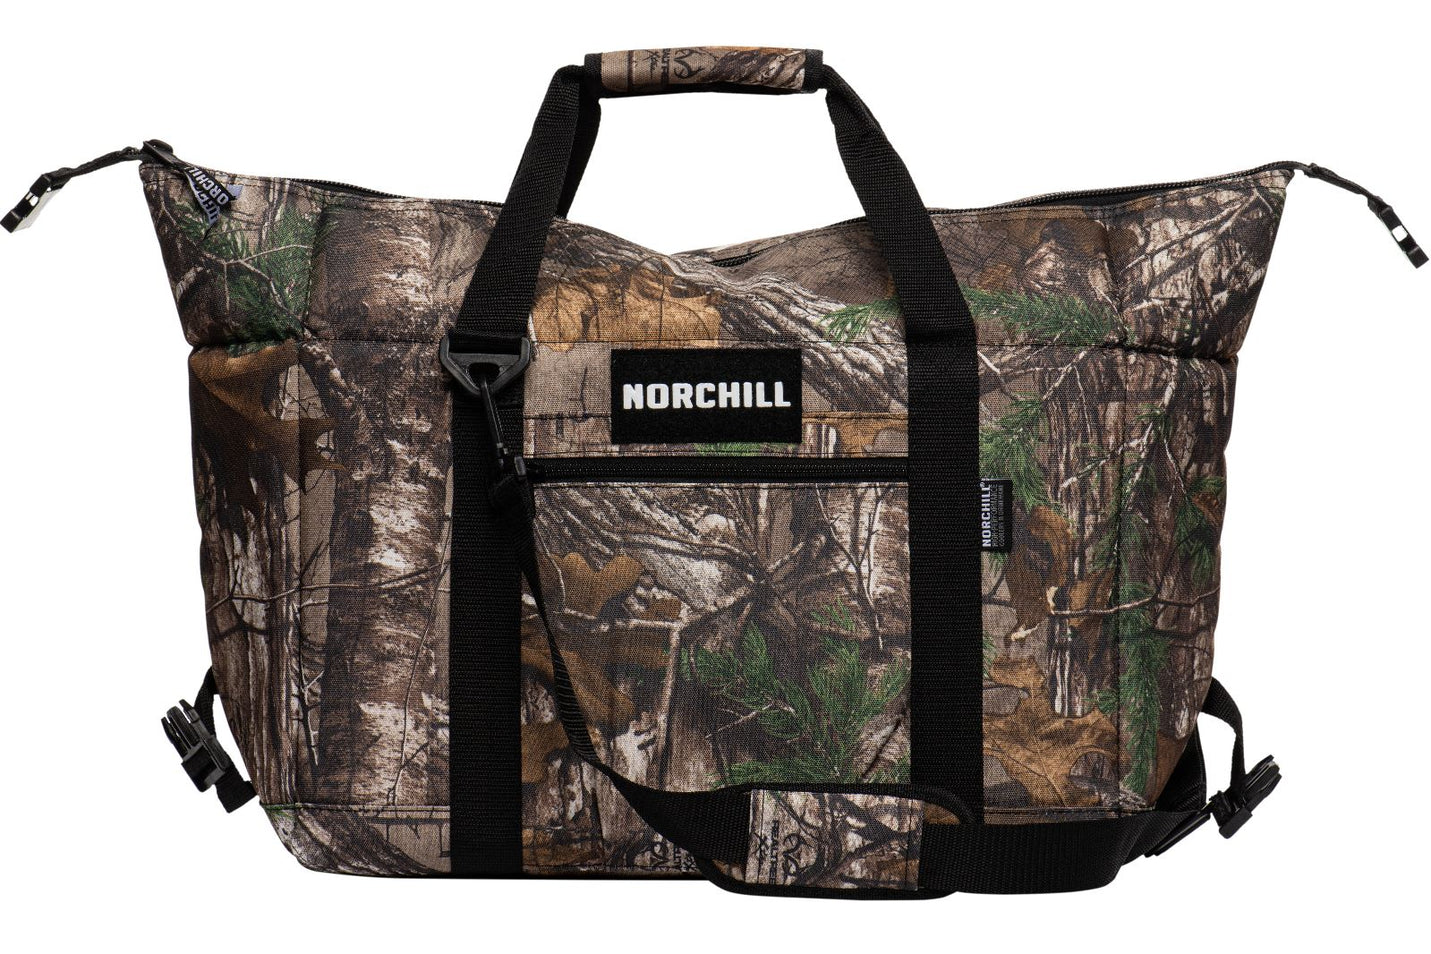 Norchill 12 Can Soft Sided Hot-Cold Cooler Bag - Realtree Camo